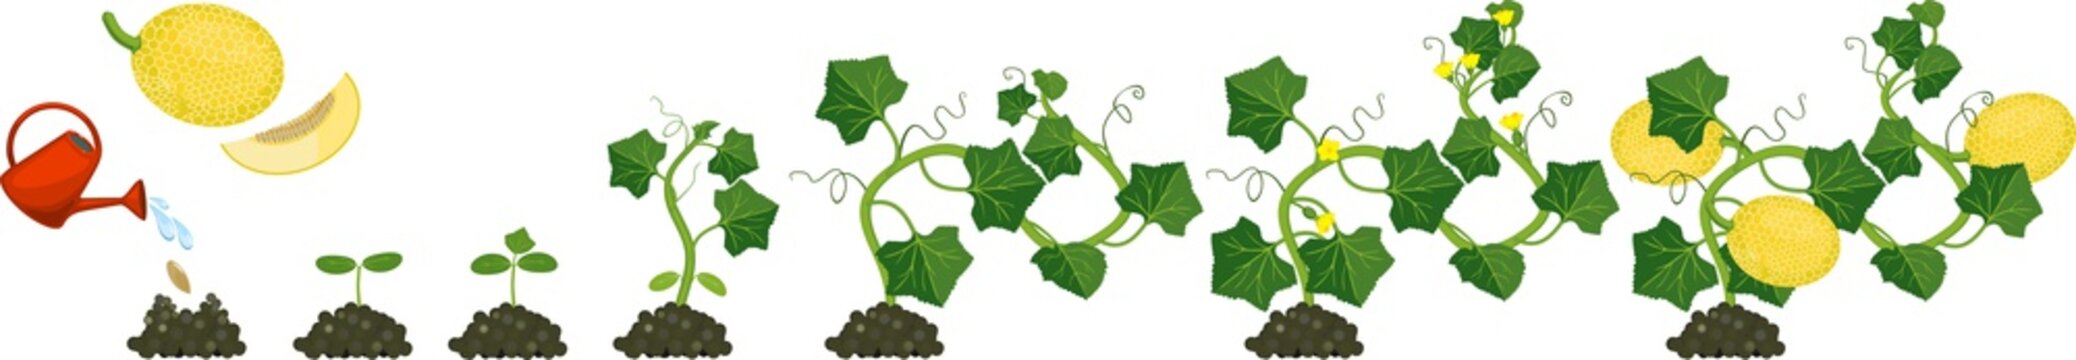 Life cycle of melon plant. Growth stages from seeding to flowering and fruit-bearing plant